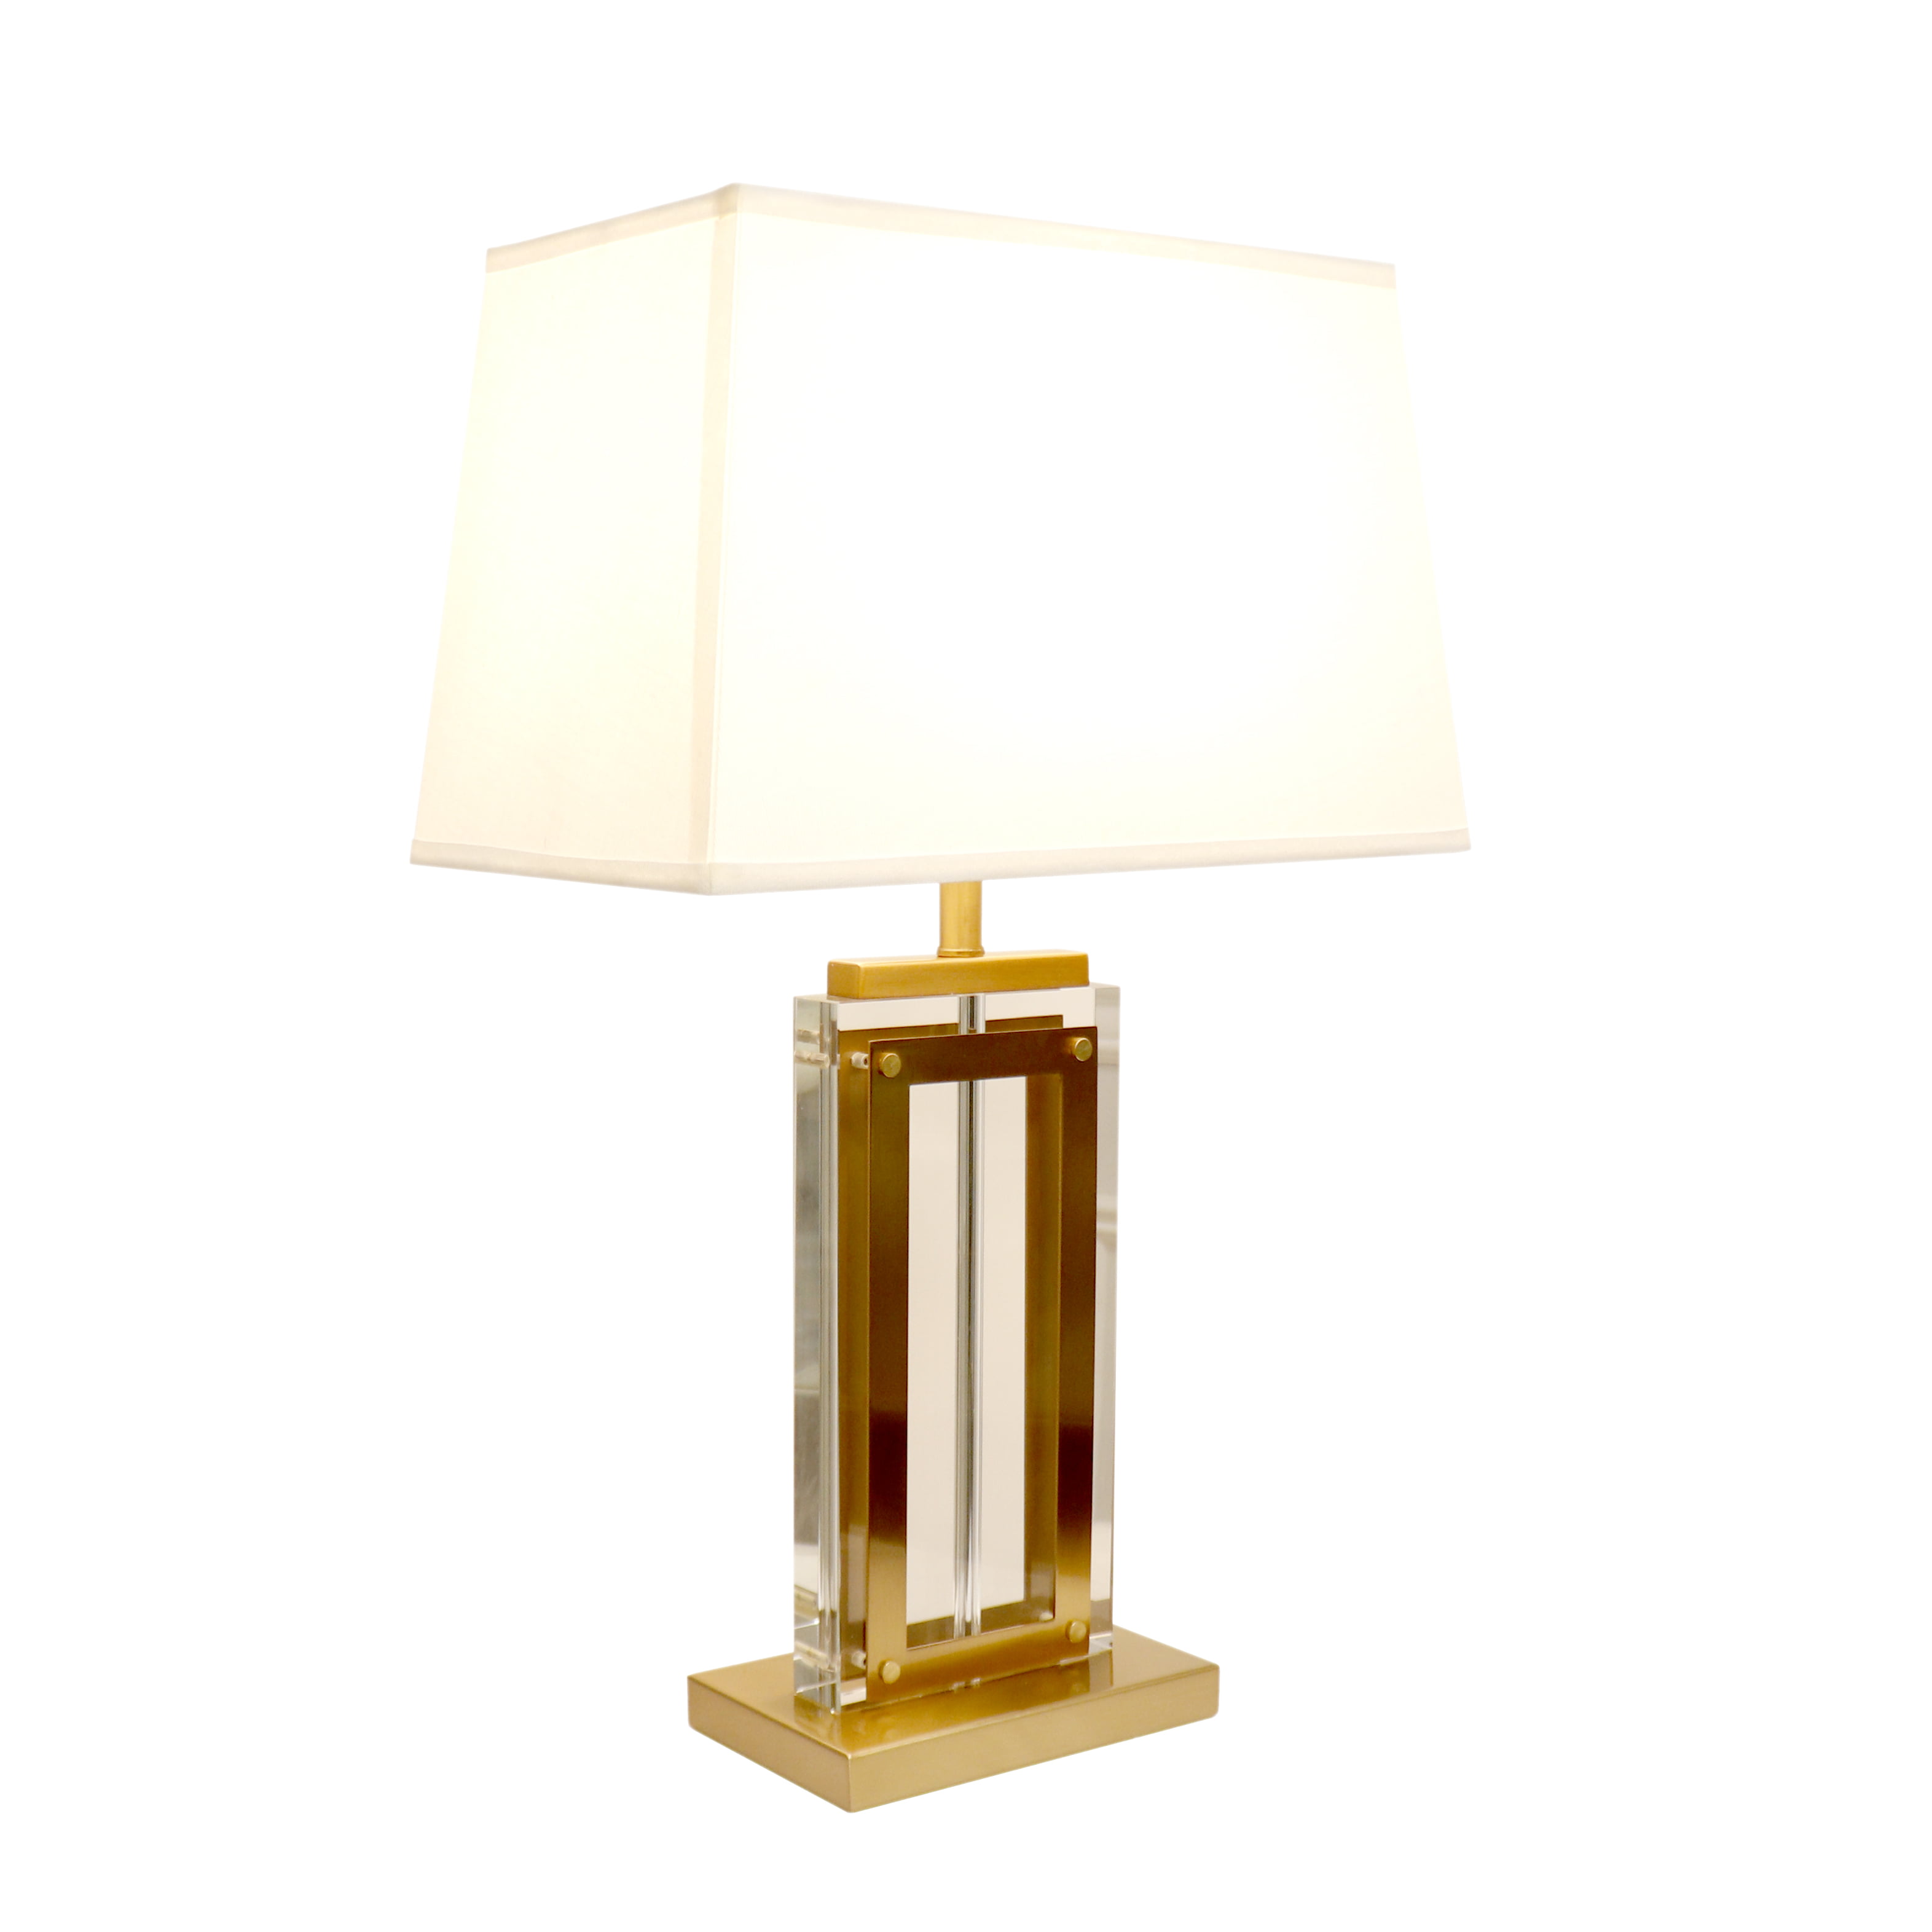 Table Lamp With E27 Bulb 44, Parramore 27 Table Lamput